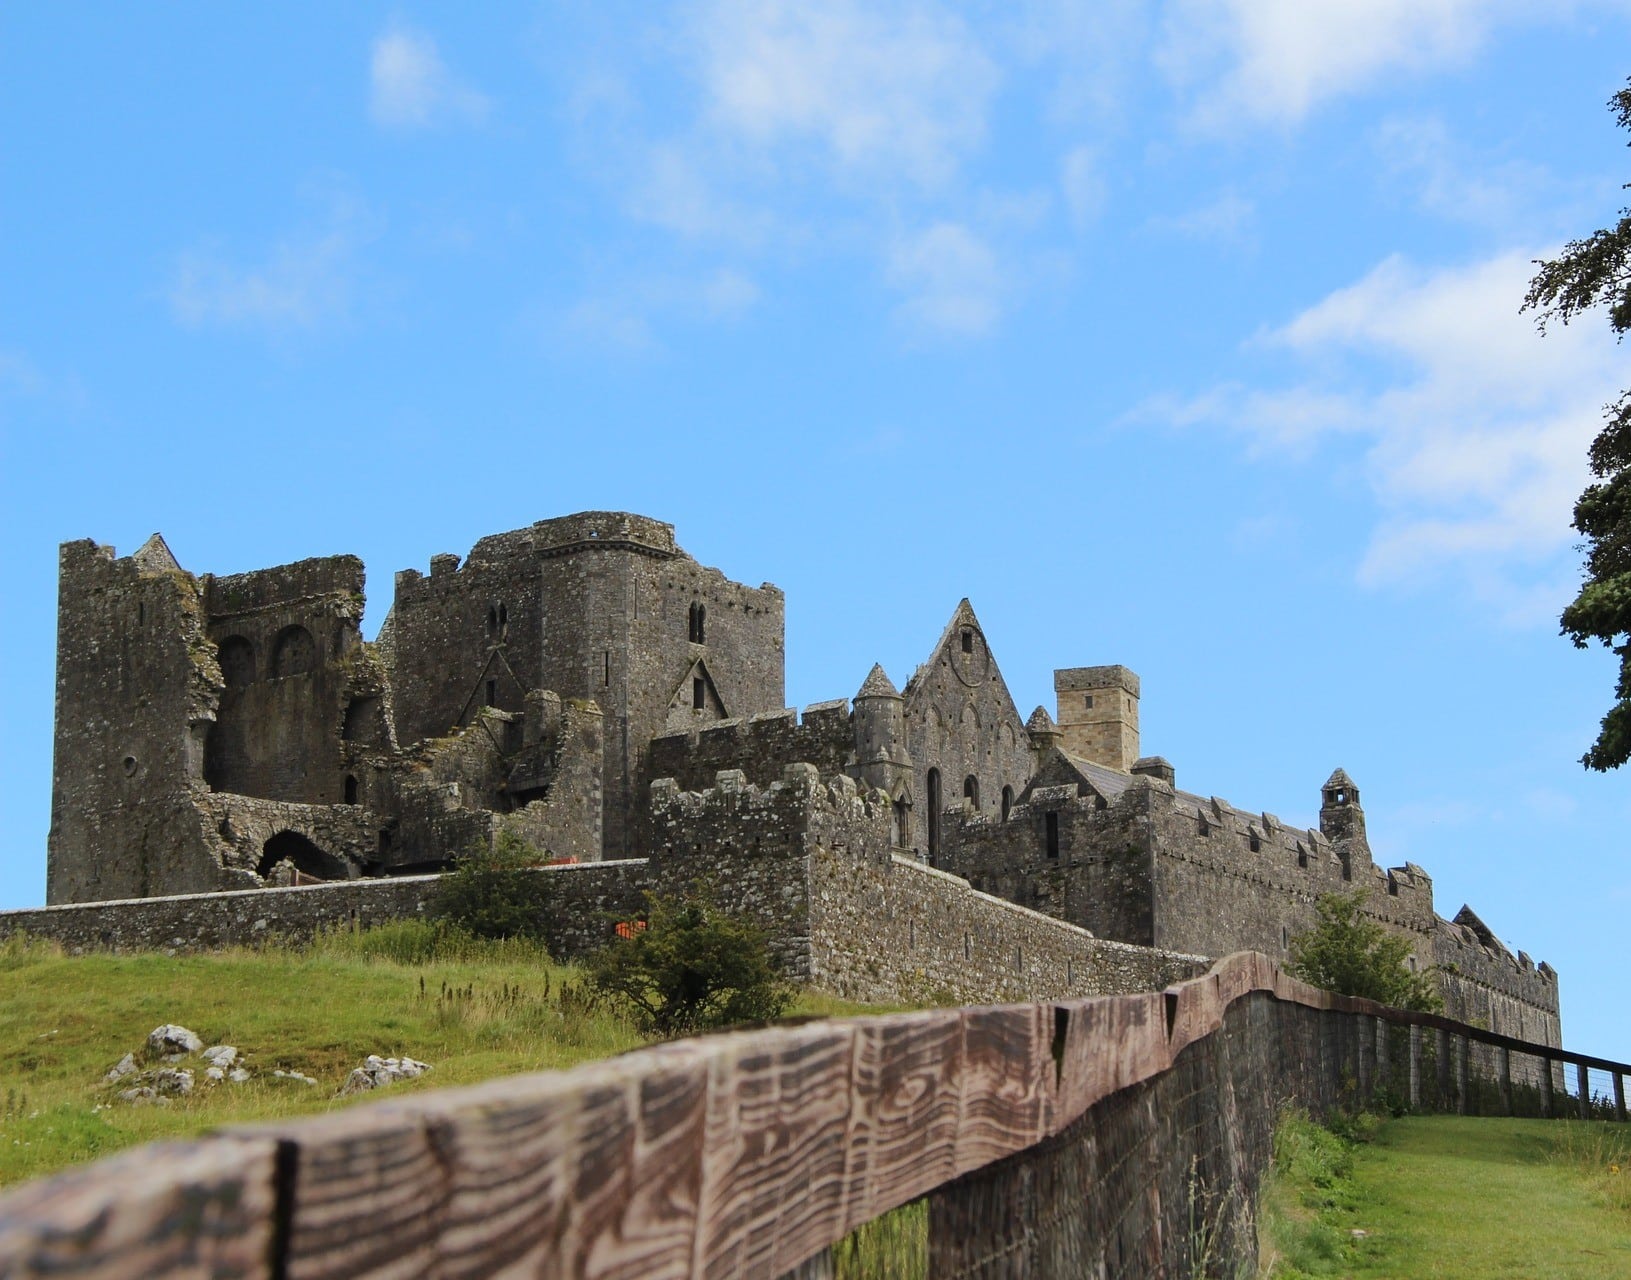 Castles In Ireland - 10 Fascinating Castles You Should See